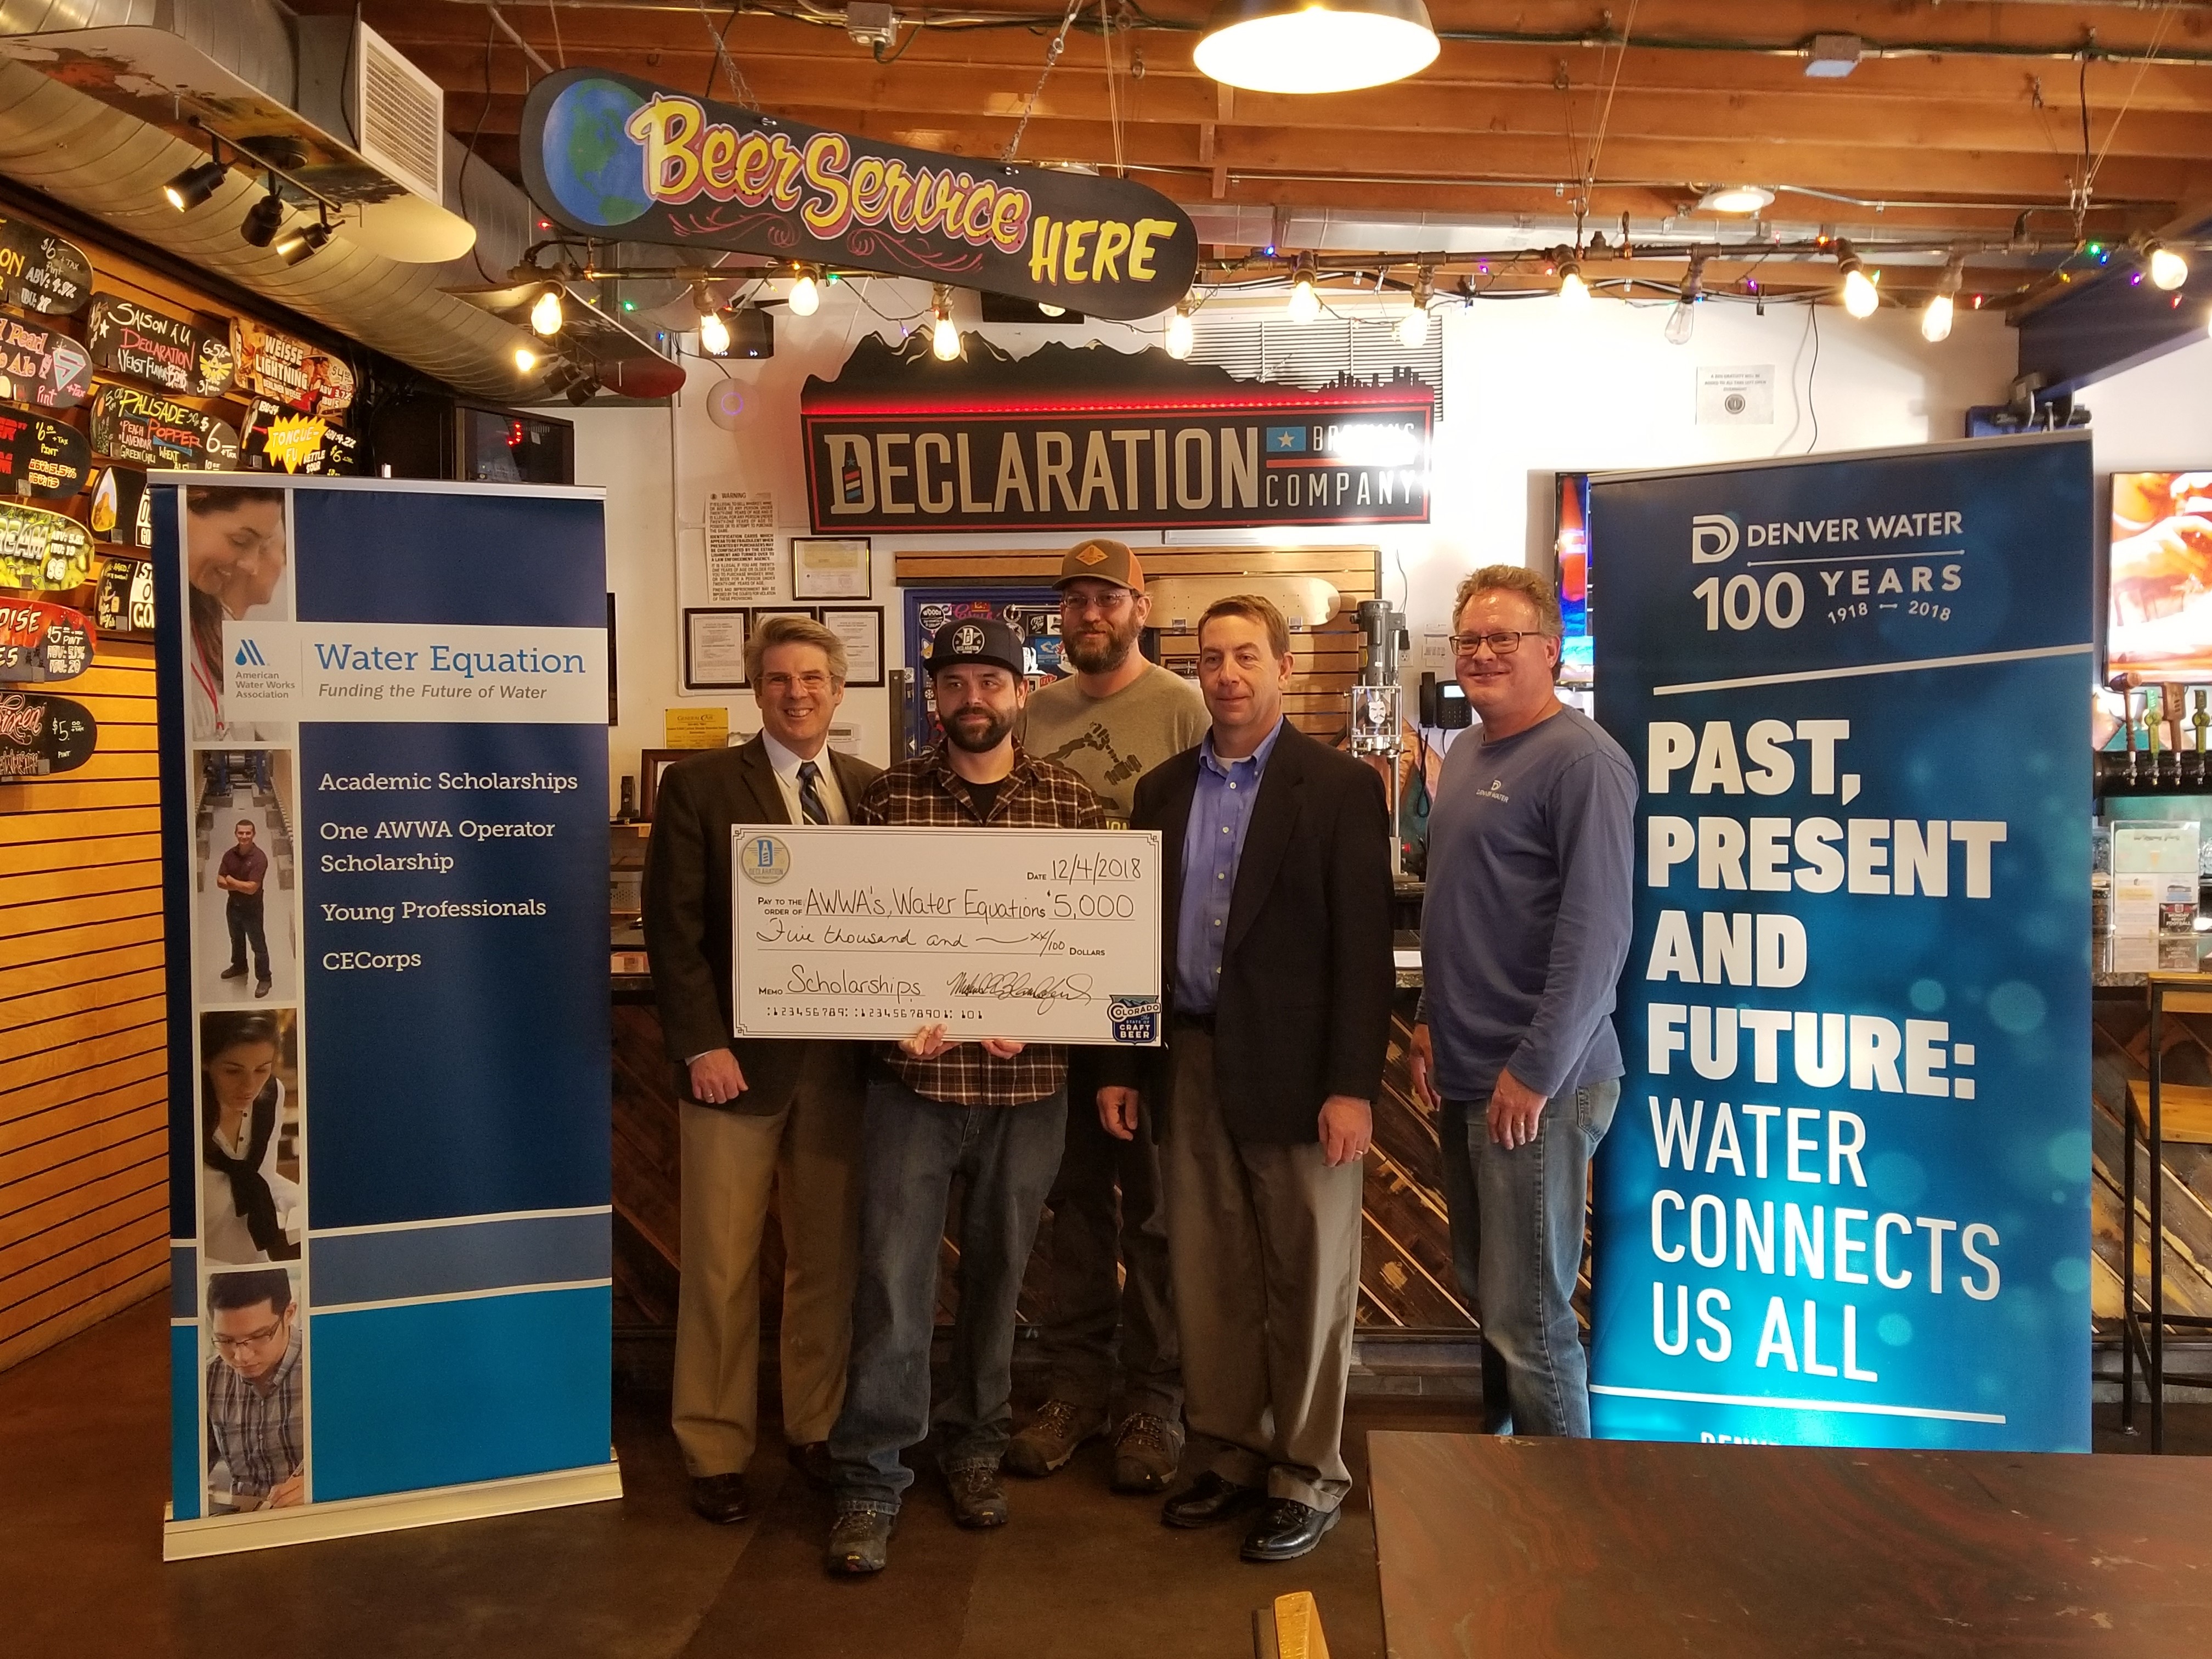 Five men standing in a bar, one of them holding a large check for $5,000, surrounded by banners from the American Water Works Association, Denver WAter, and underneath a sign for Declaration Brewery.